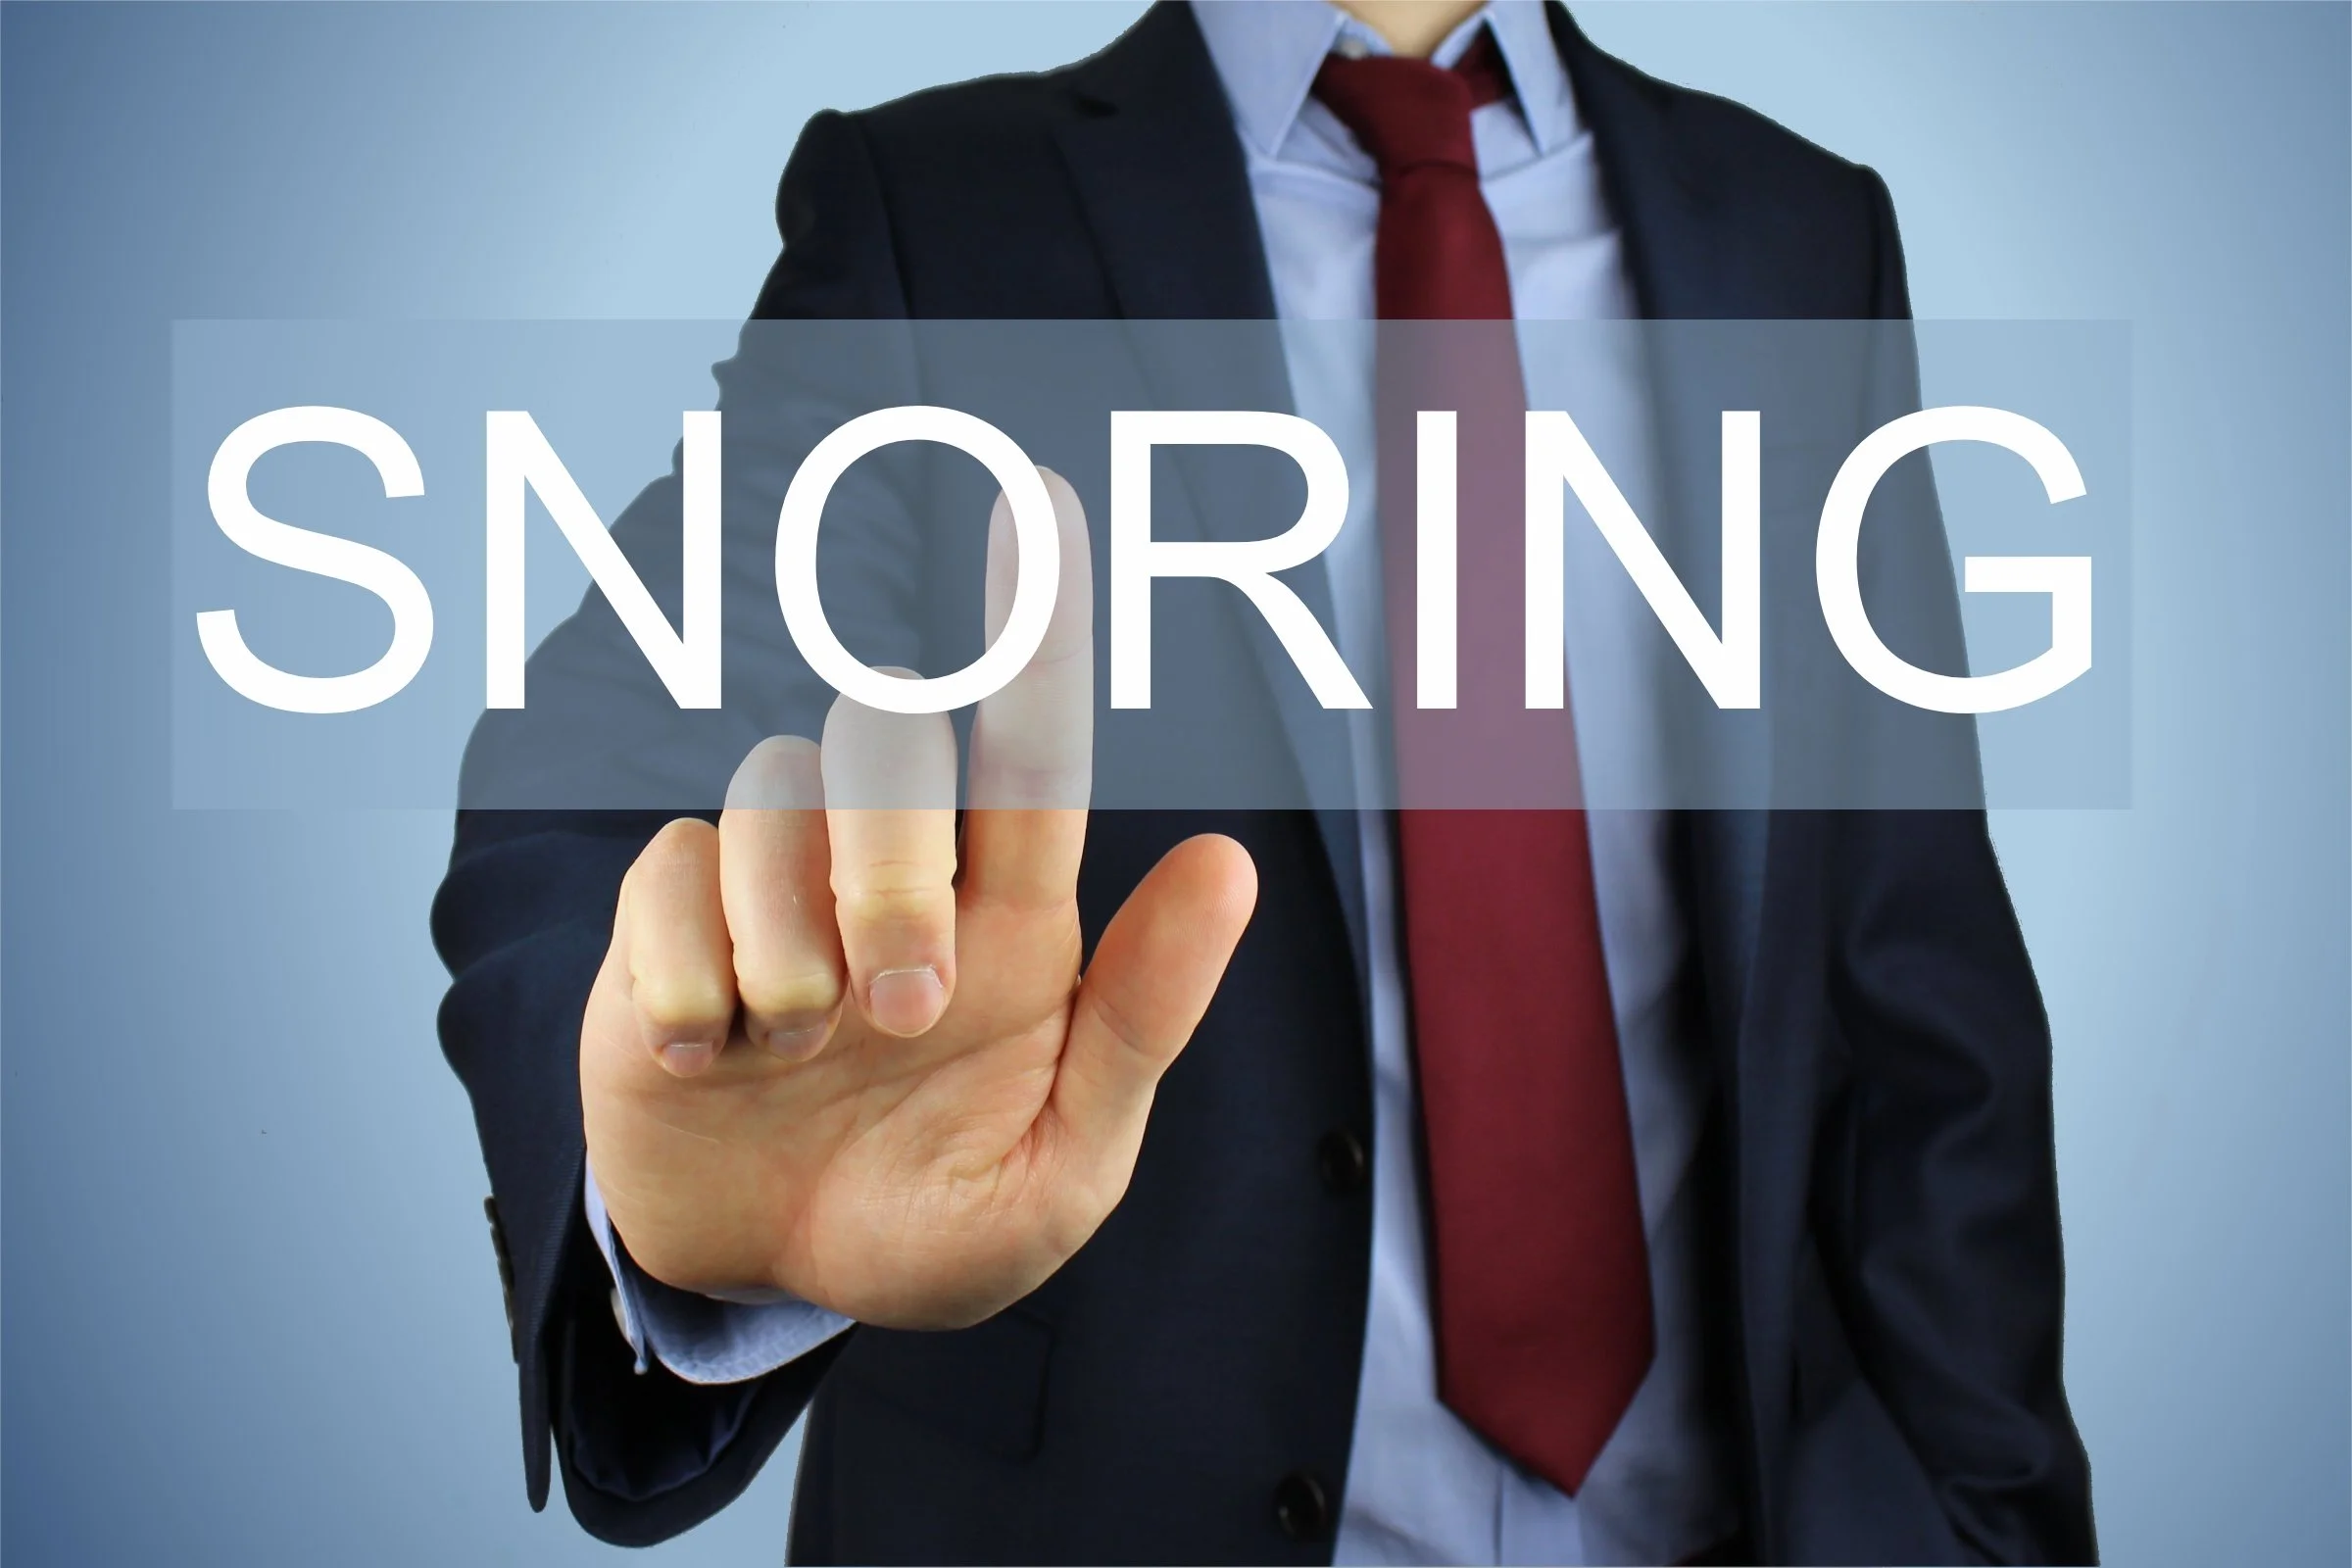 How To Stop Someone From Snoring Without Waking Them